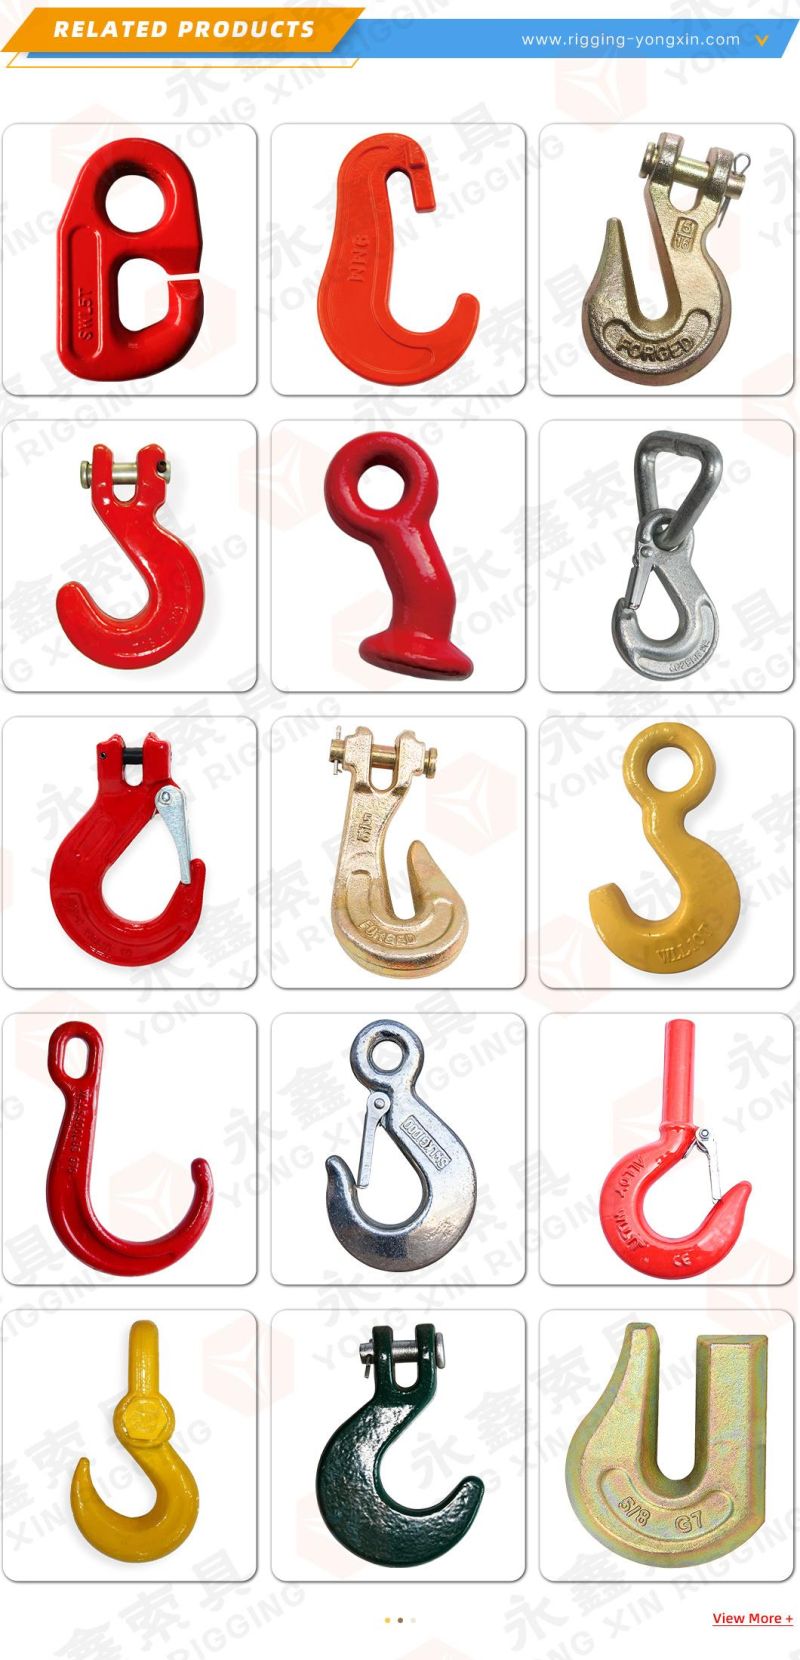 Red Painted Drop Forged Us Type S 322 Heavy Chain Hoist Lifting Swivel Hook with Safety Latch